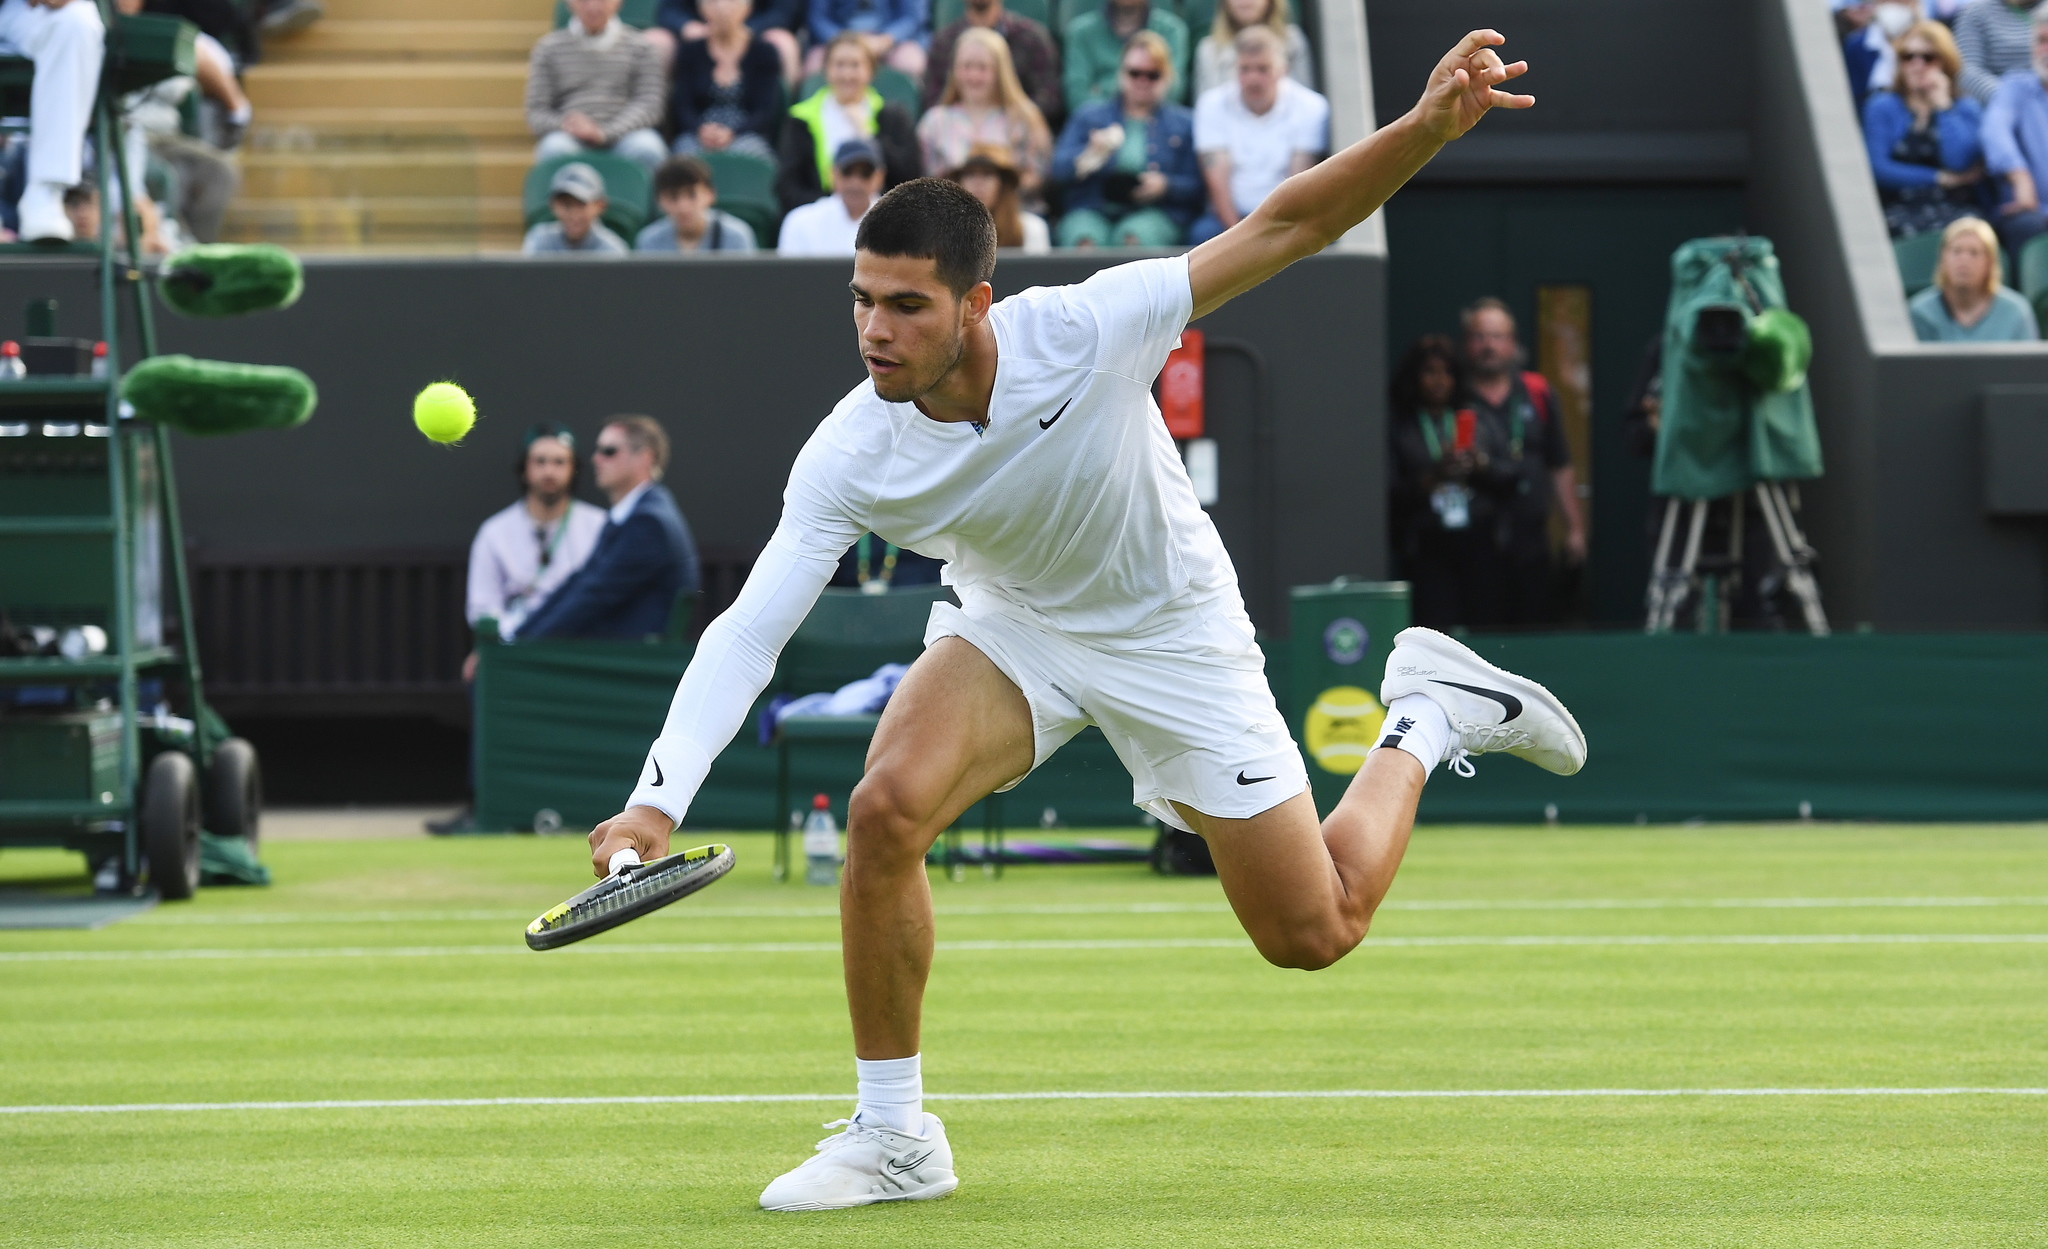 Wimbledon (United Kingdom), 29/06/2022.- Carlos  lt;HIT gt;Alcaraz lt;/HIT gt; of Spain in action in the men's second round match against Tallon Griekspoor of the Netherlands at the Wimbledon Championships, in Wimbledon, Britain, 29 June 2022. (Tenis, Países Bajos; Holanda, España, Reino Unido) EFE/EPA/ANDY RAIN EDITORIAL USE ONLY